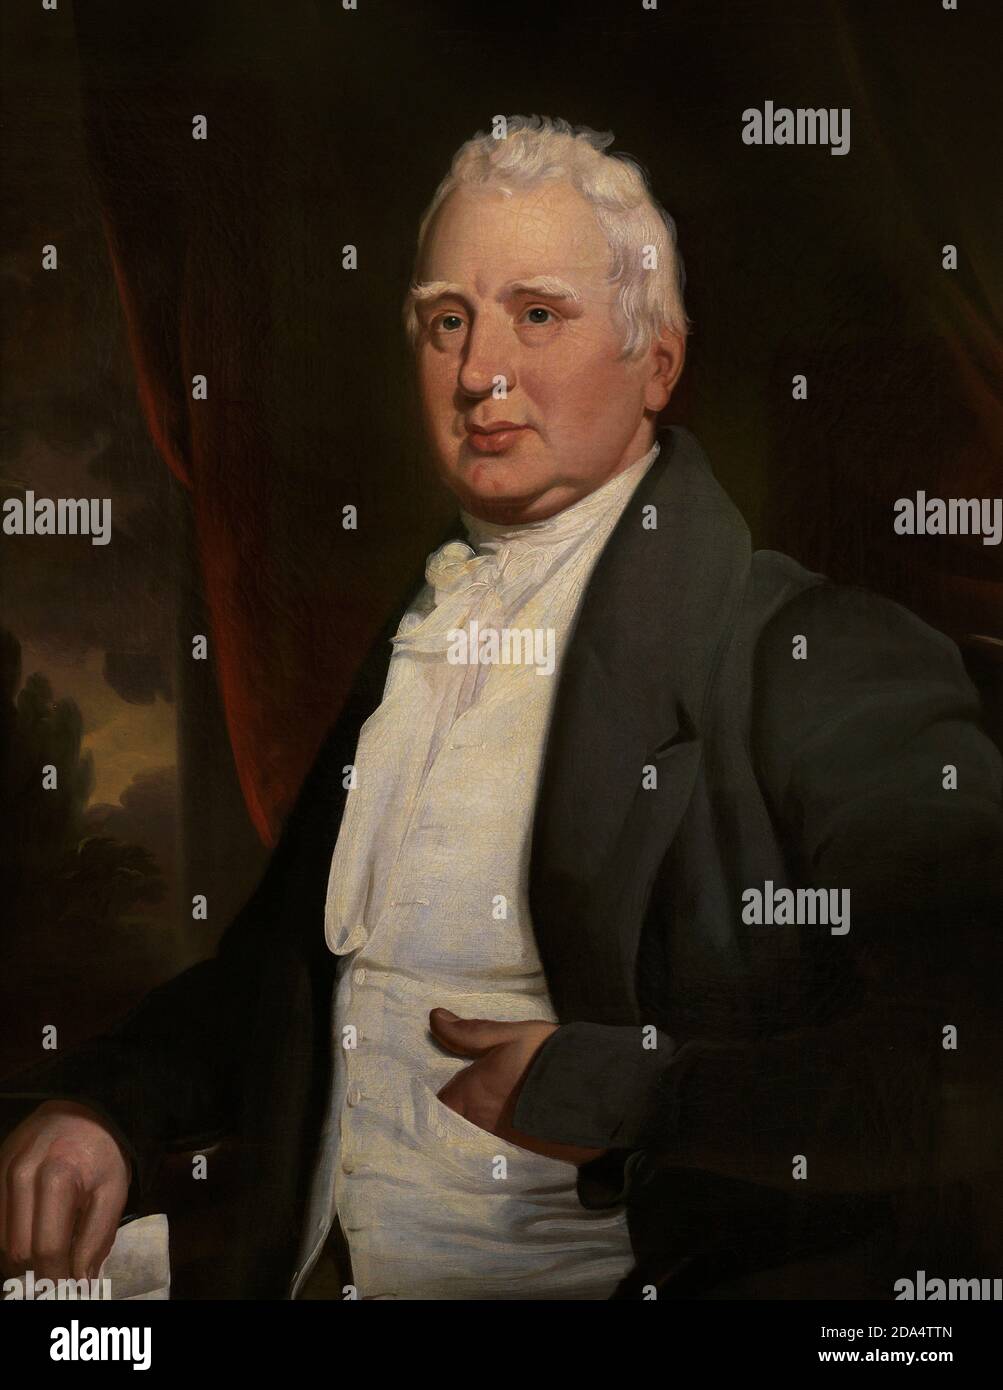 William Cobbett (1763–1835). English radical journalist and politician. Portrait, possibly by George Cooke (1781-1834). Oil on canvas (91,4 x 71,1 cm), c. 1831. National Portrait Gallery. London, England, United Kingdom. Stock Photo